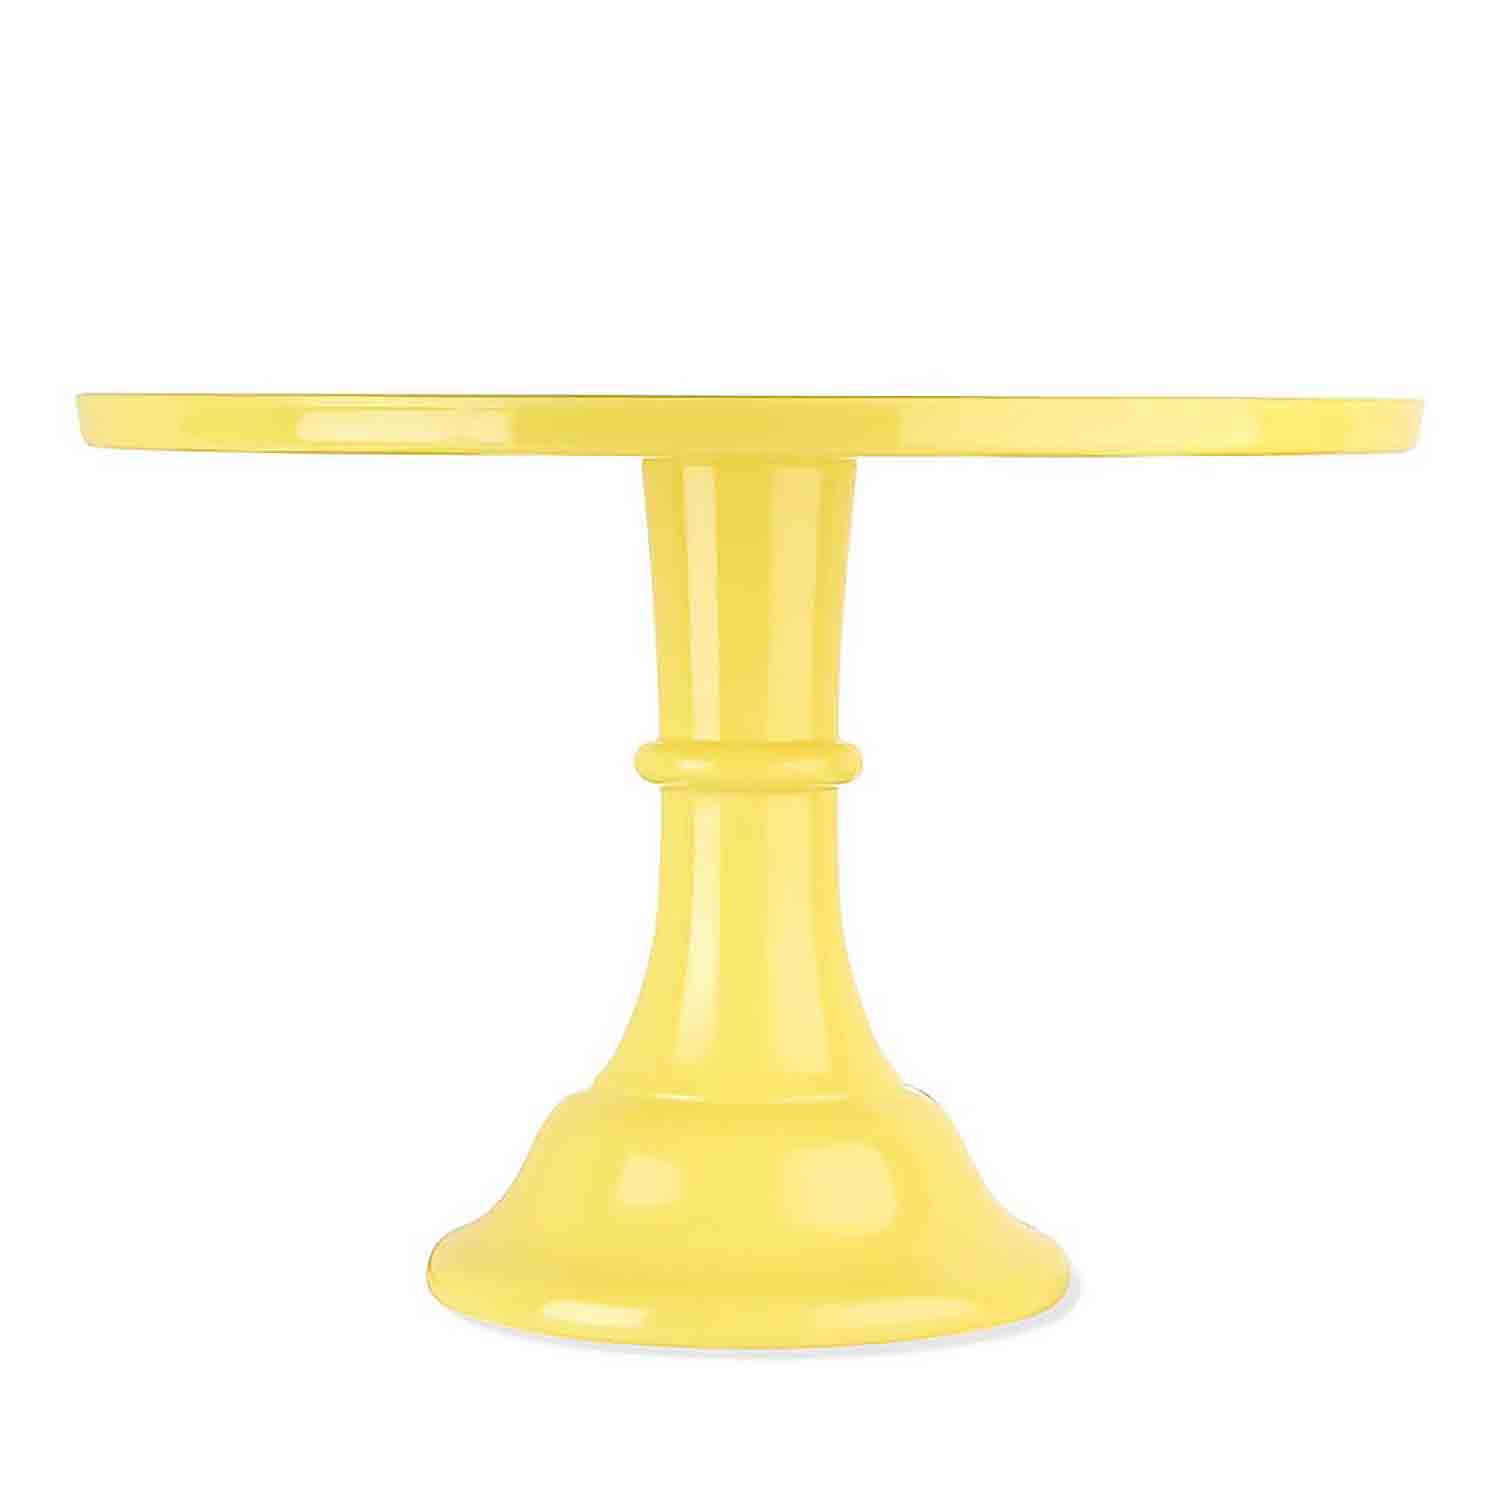 Twine Yellow Melamine Cake Stand, Cupcake Stand, Home Decor, Food Service,  Dessert Accessory, Yellow, Set of 1